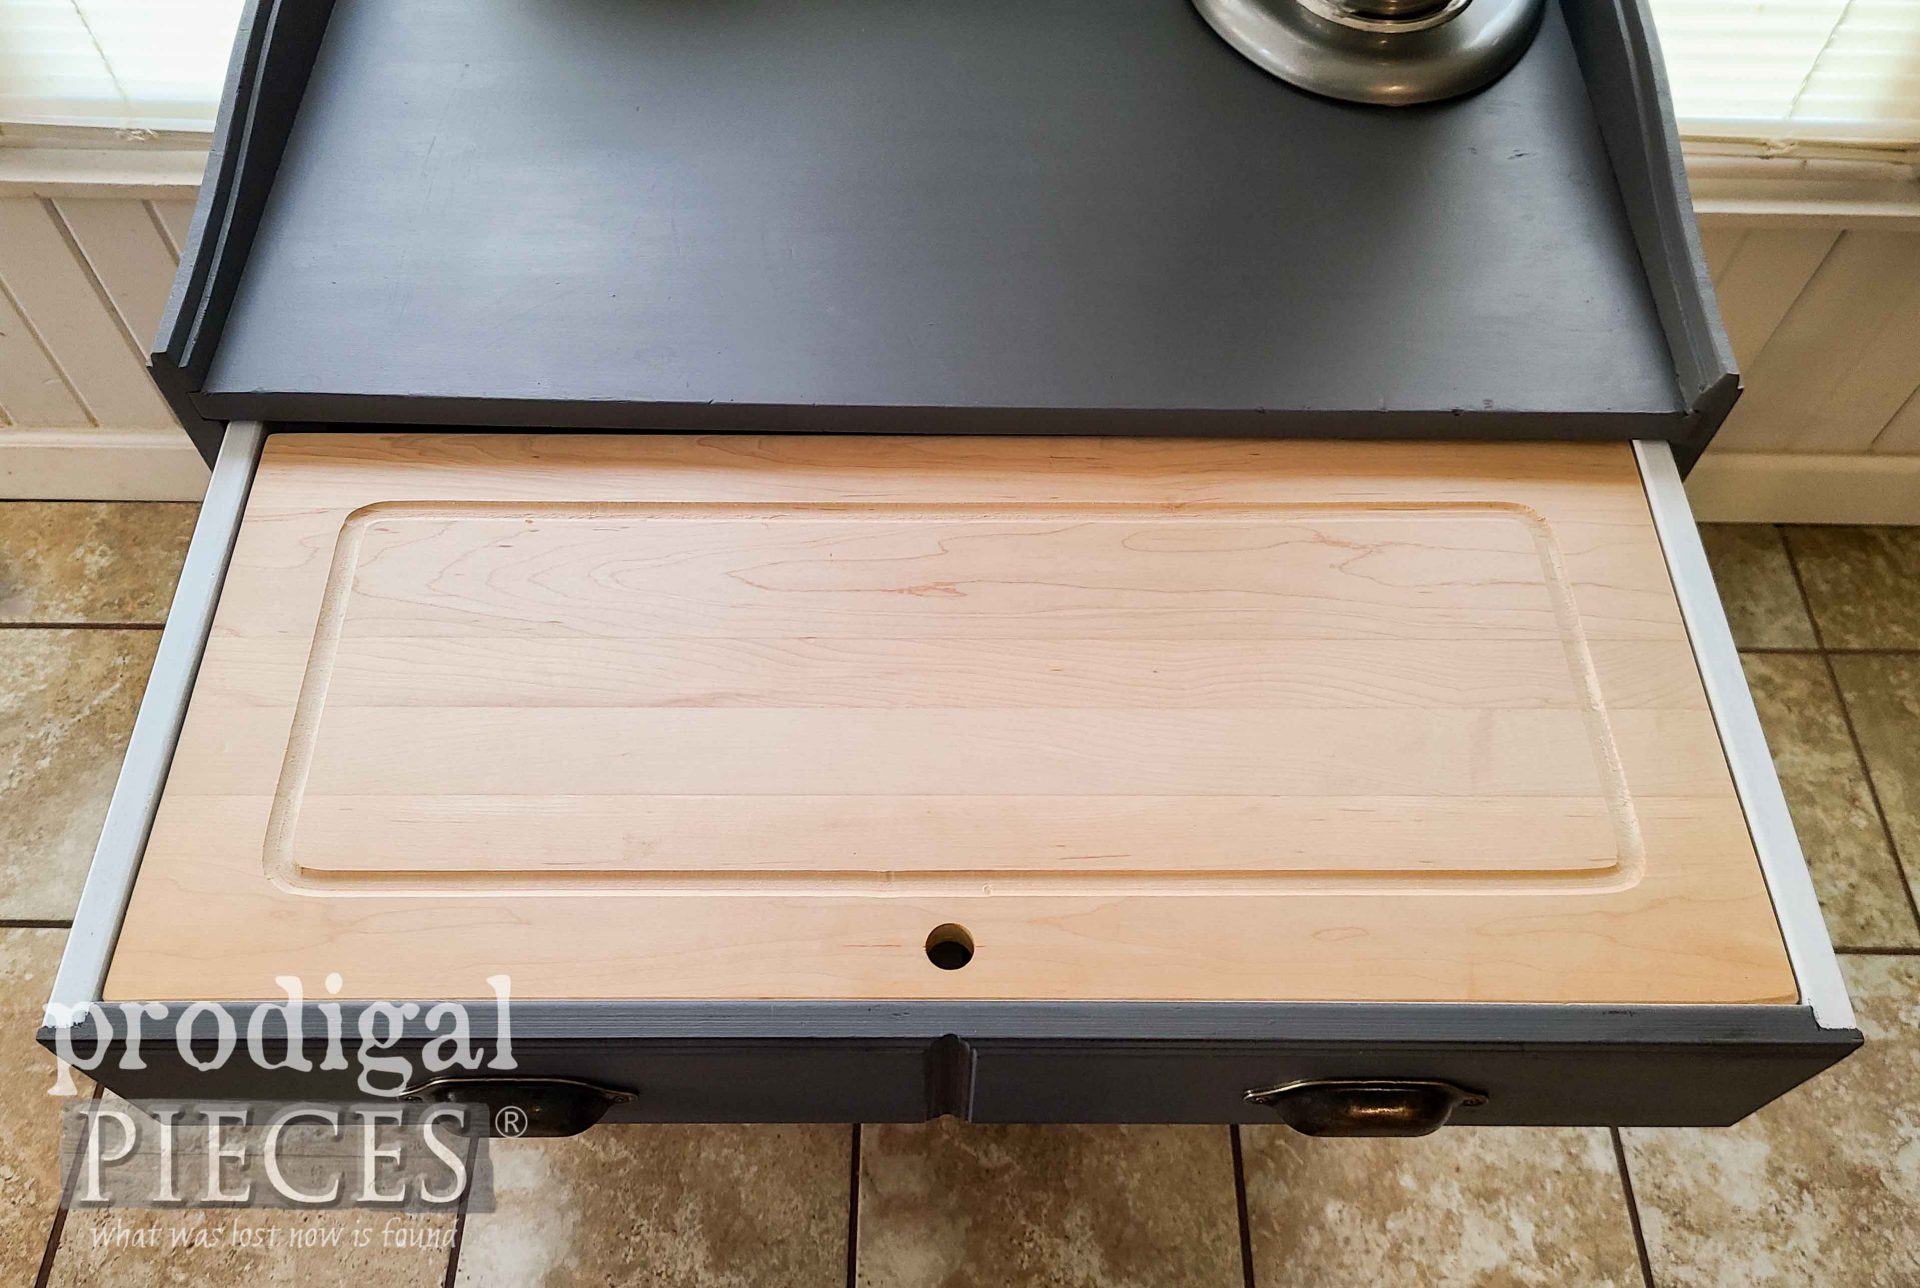 Built-In Cutting Board in Baking Cabinet by Larissa of Prodigal Pieces | prodigalpieces.com #prodigalpieces #farmhouse #diy #furniture #home #homedecor